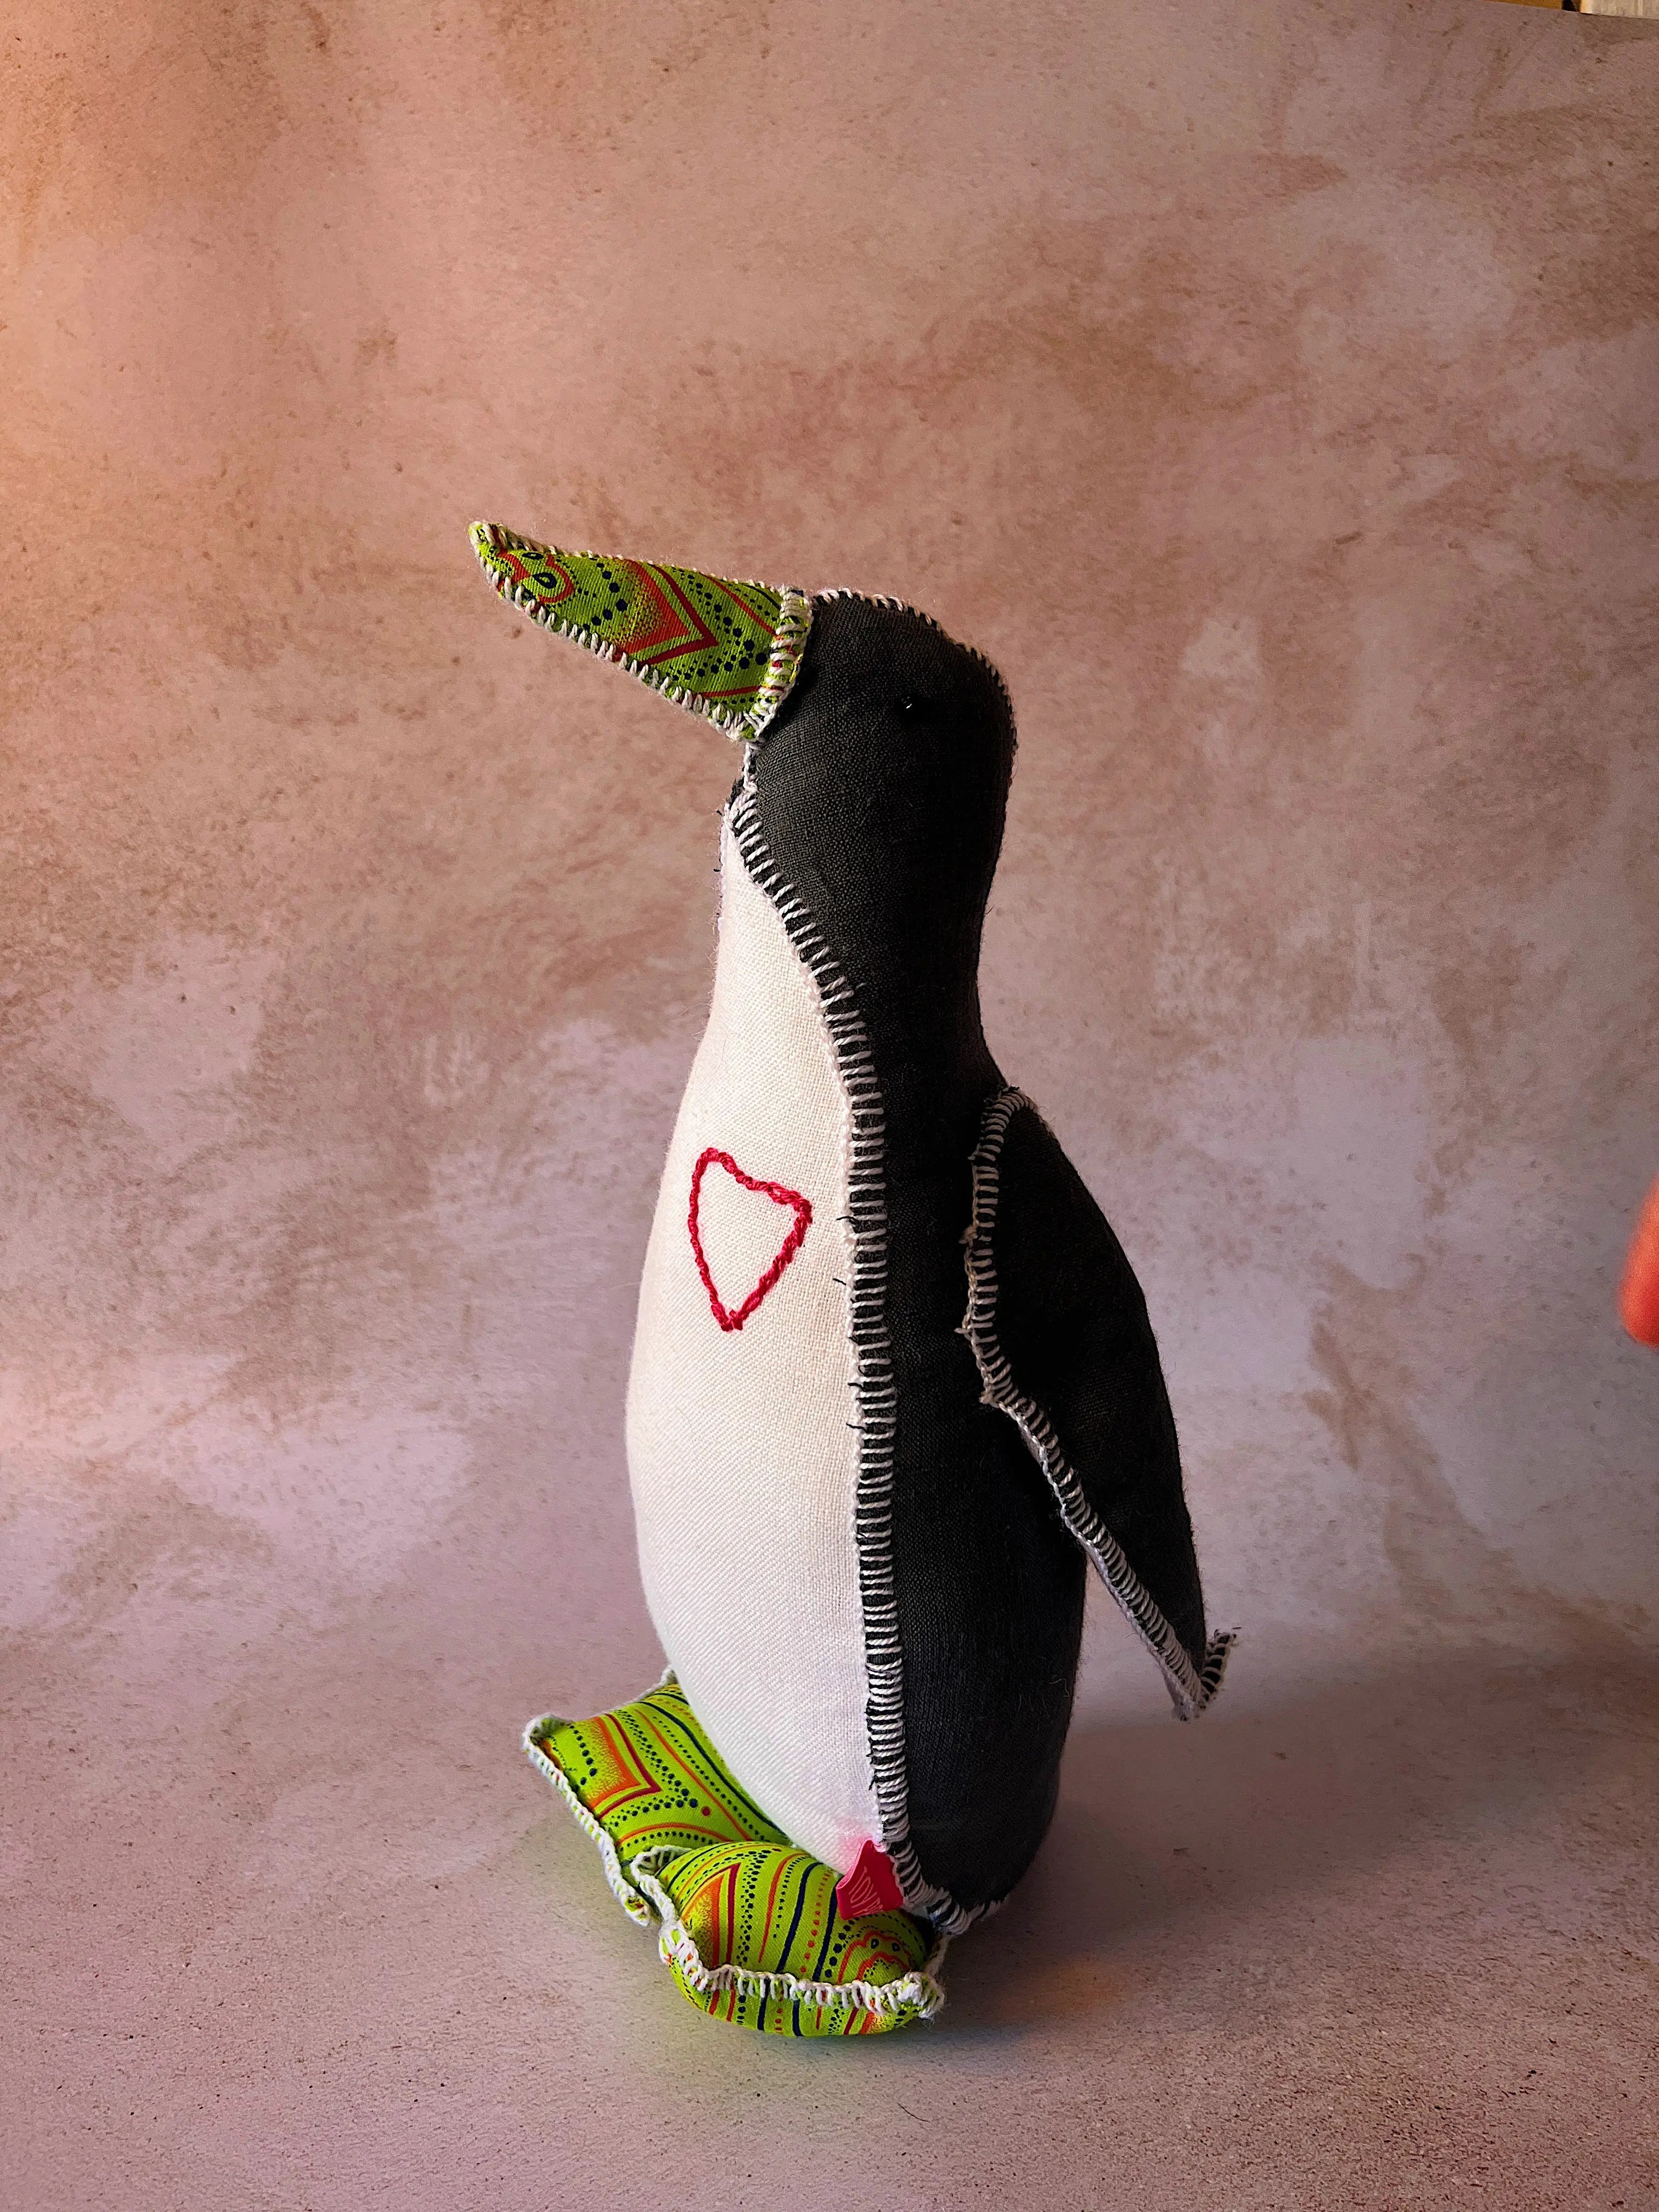 Handmade Penguins Toy Project